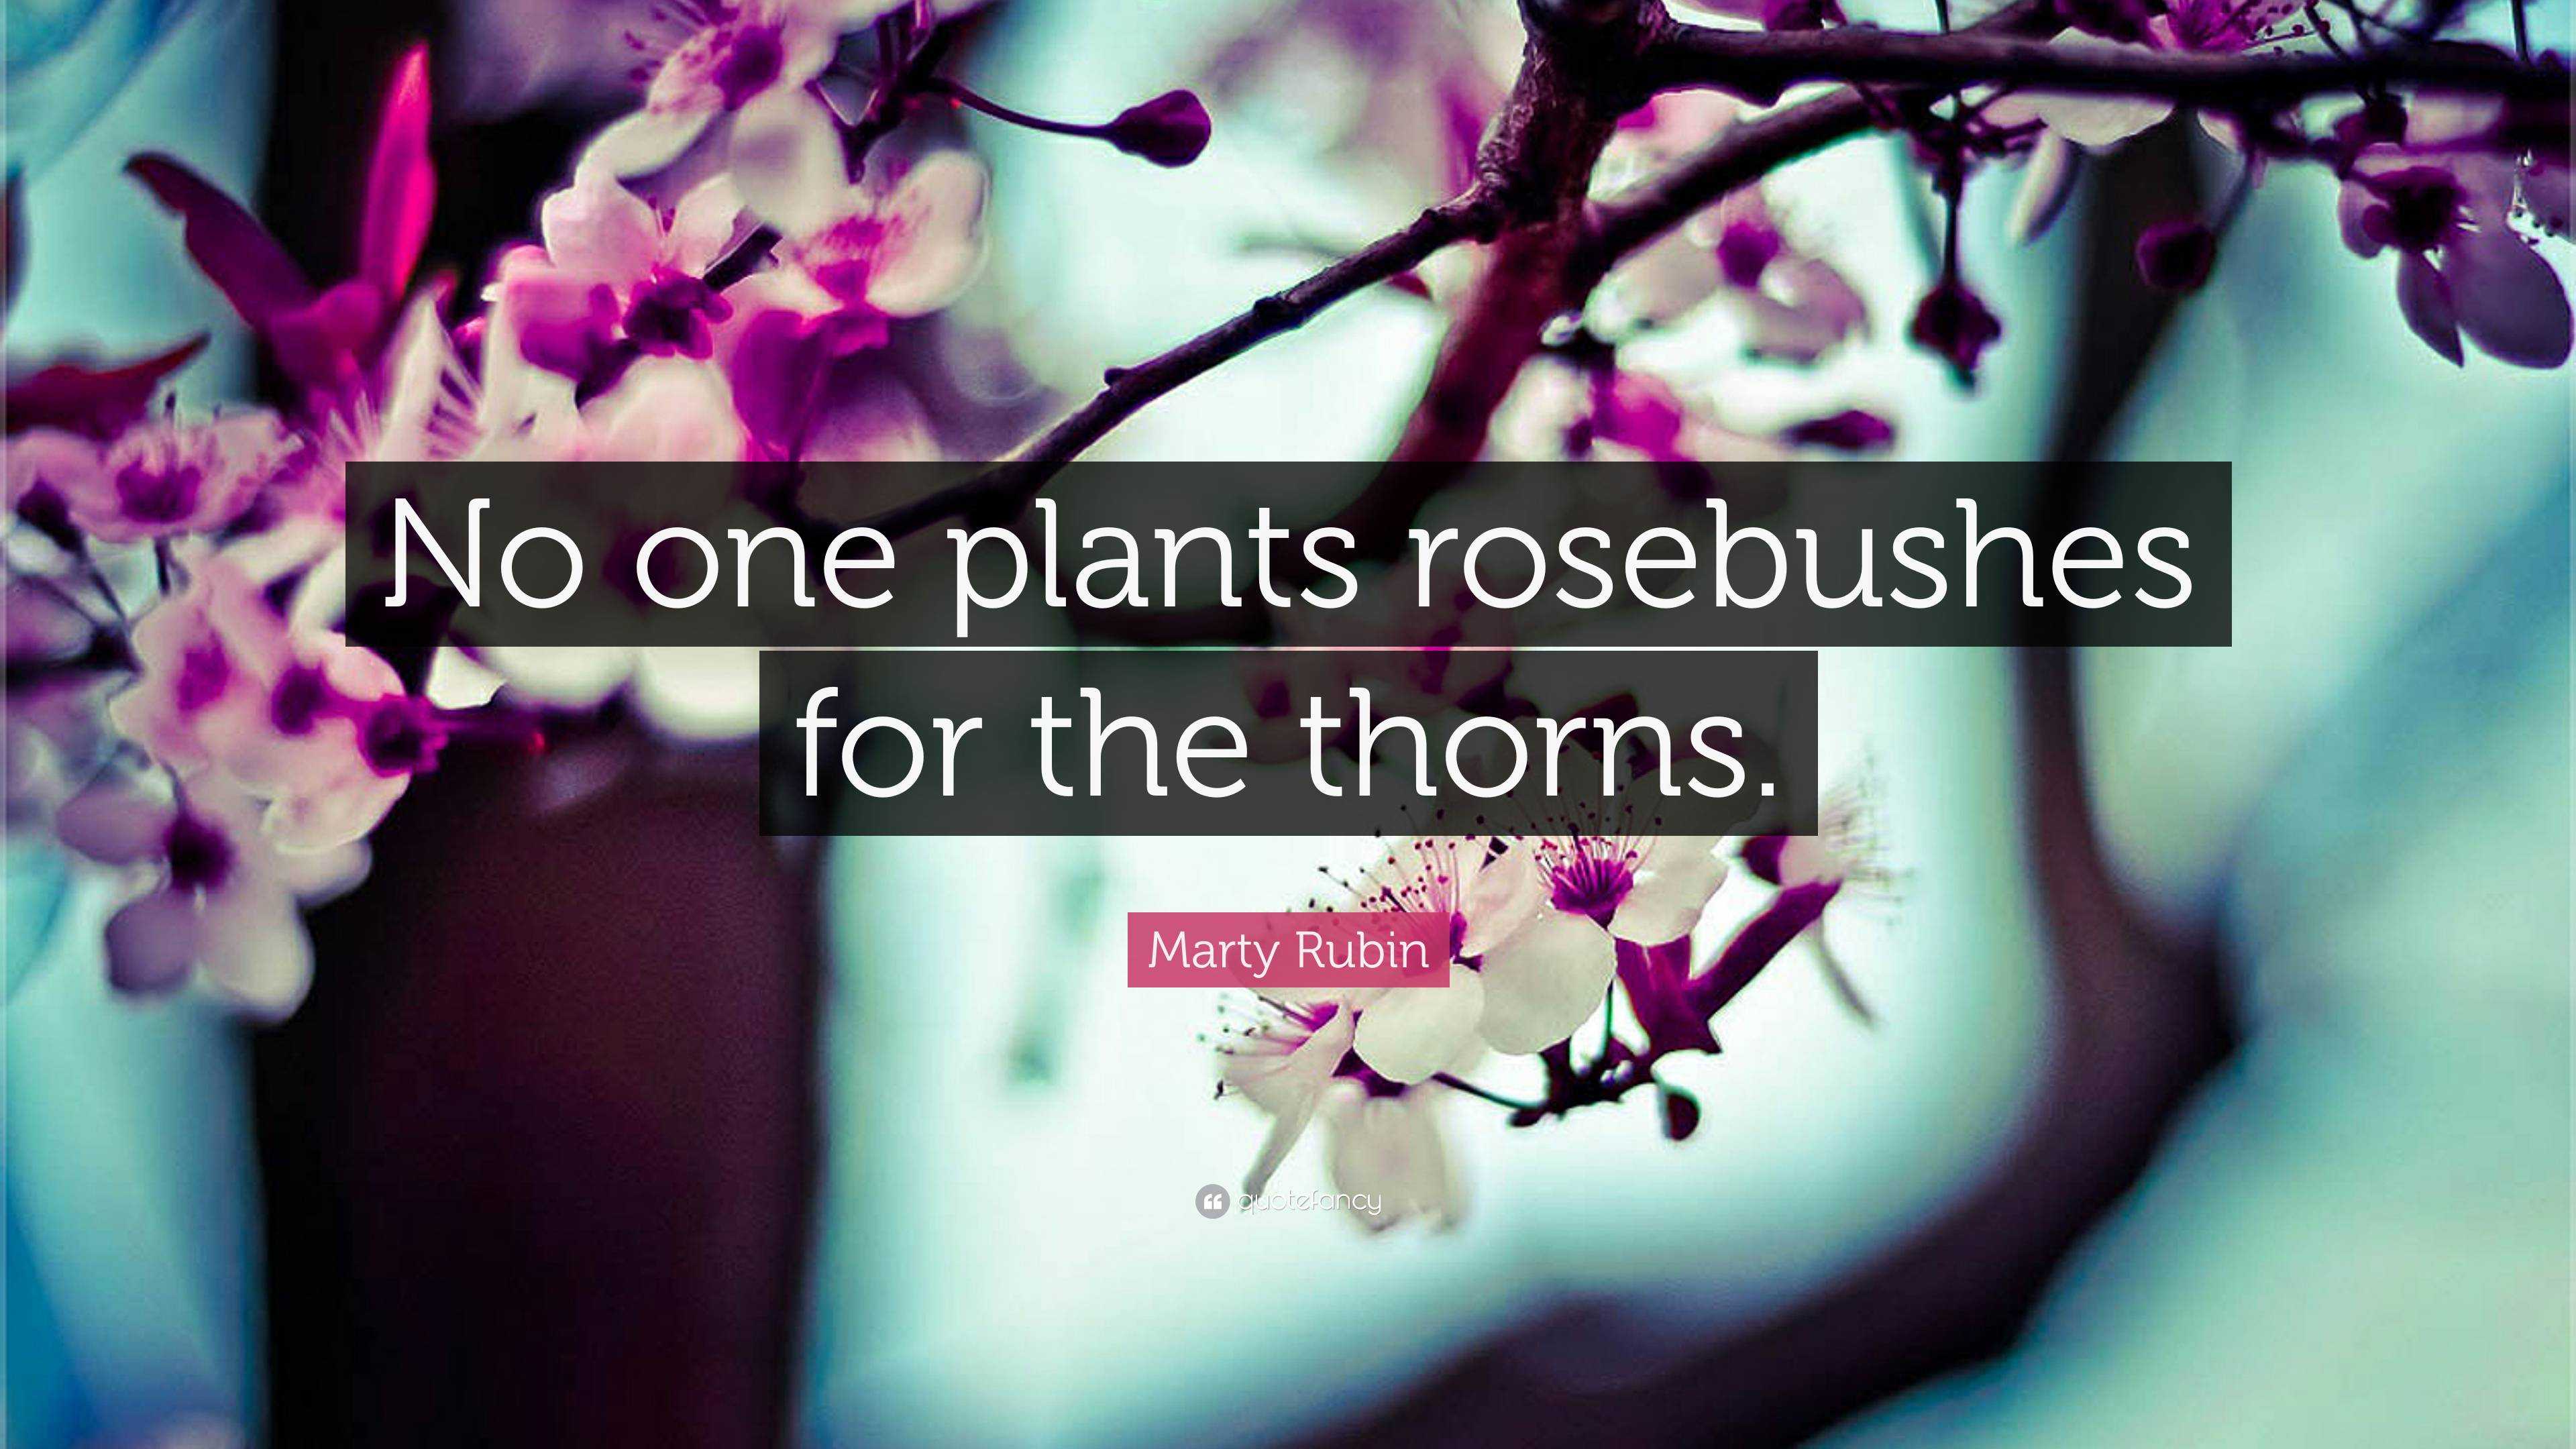 Marty Rubin Quote: “No one plants rosebushes for the thorns.”